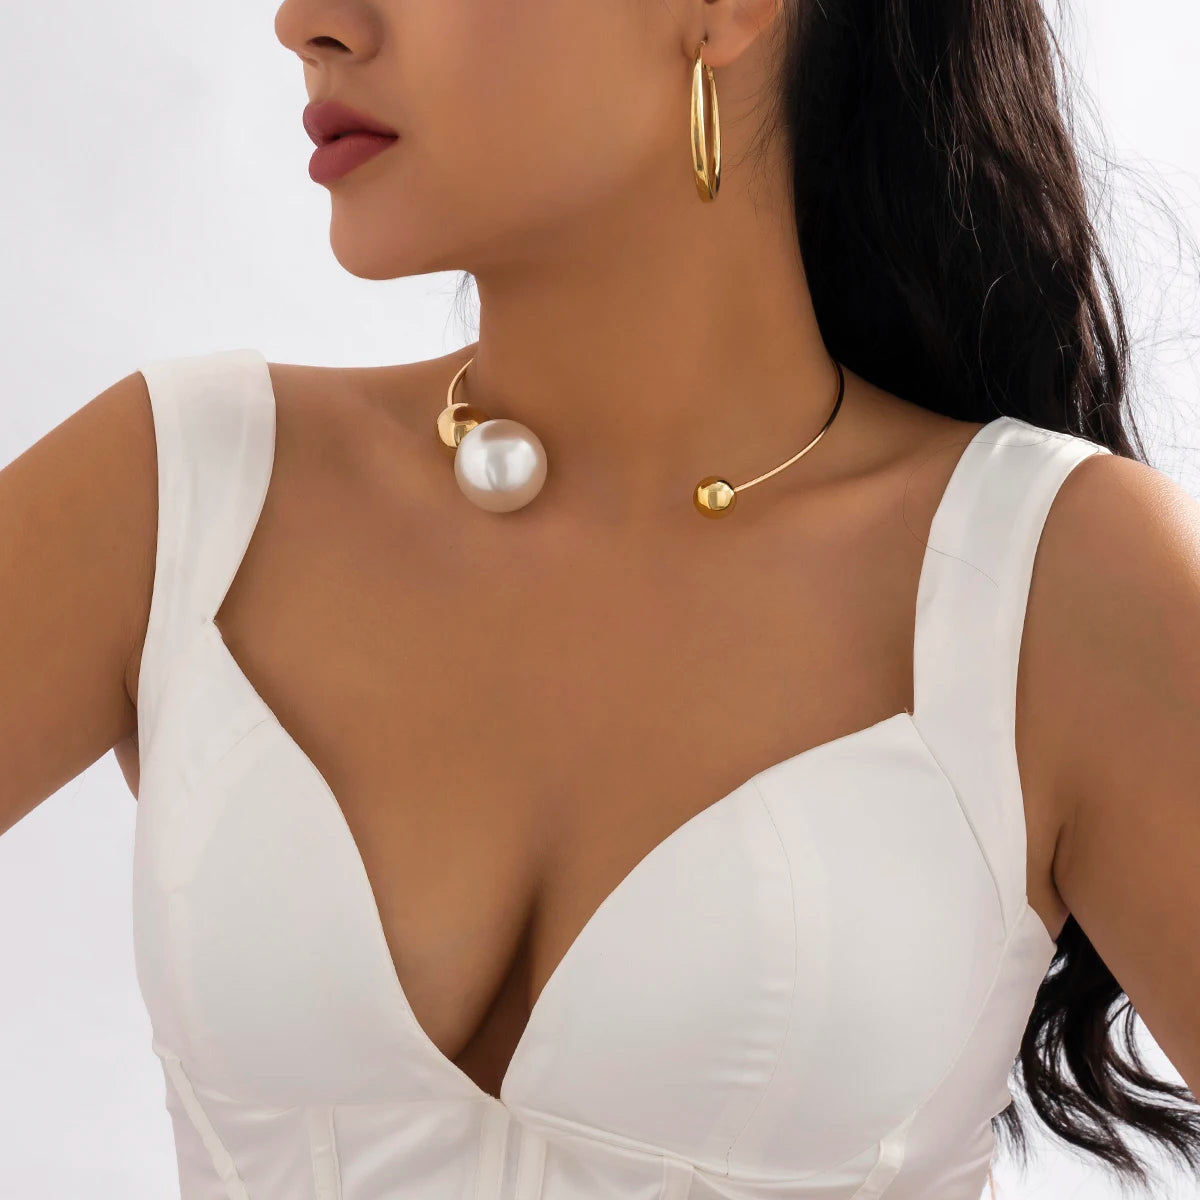 Elegant Gothic Style Big White Faux Pearl Choker Necklace